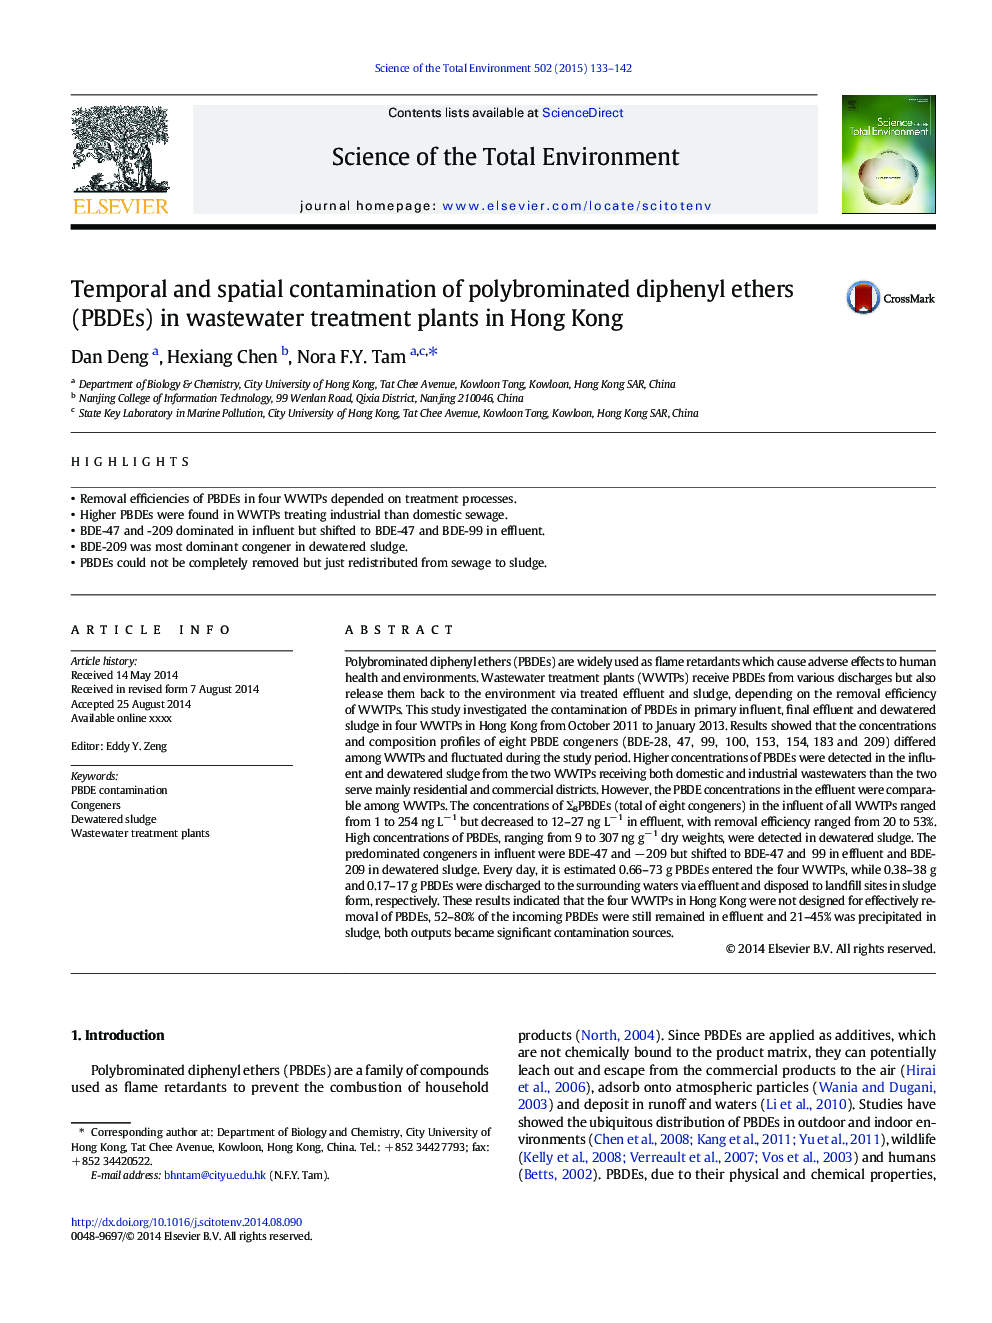 Temporal and spatial contamination of polybrominated diphenyl ethers (PBDEs) in wastewater treatment plants in Hong Kong